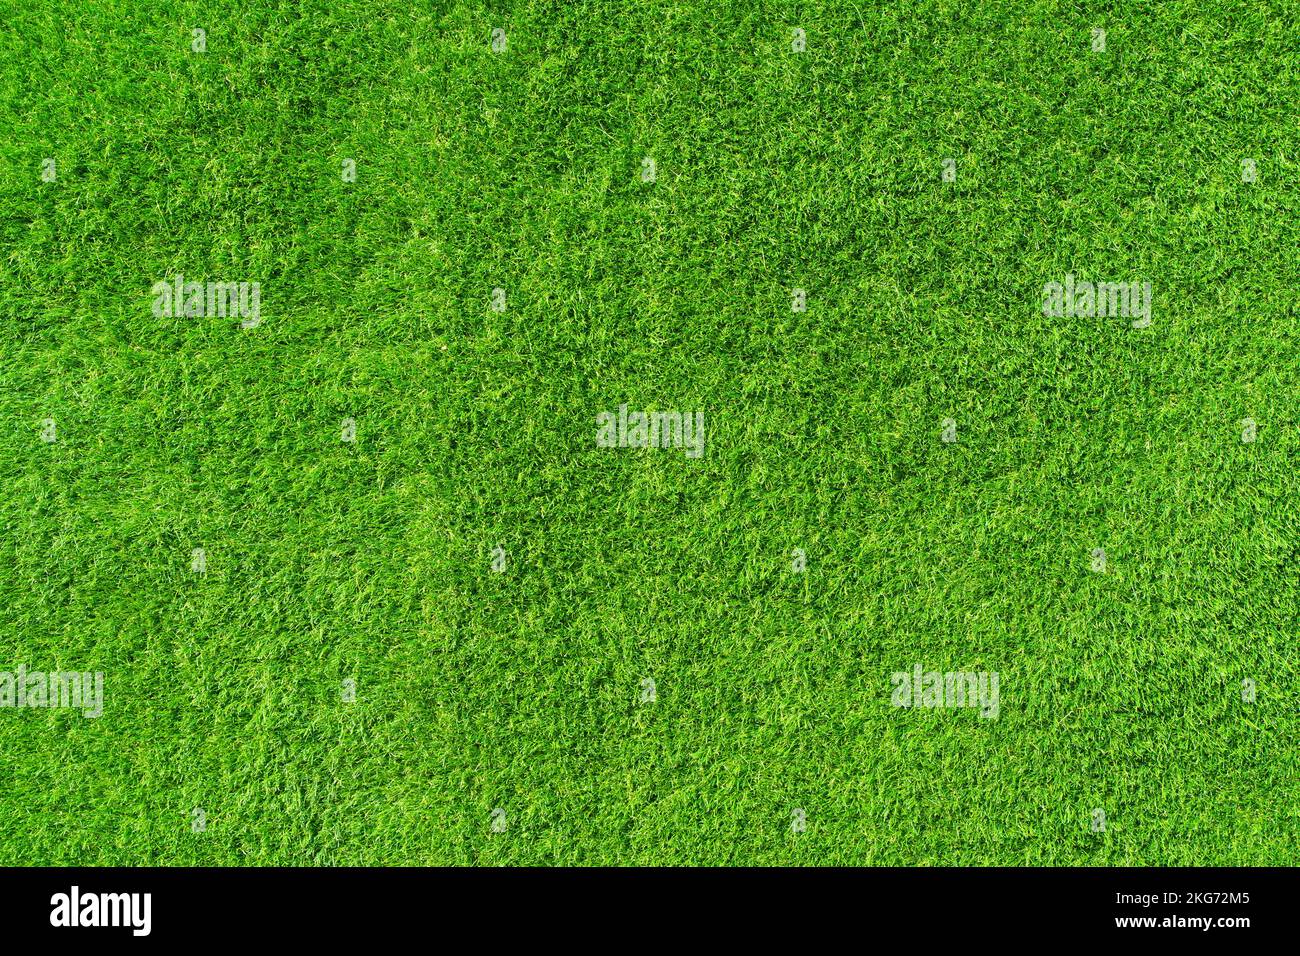 Lawn background. Green grass surface. Sport, decor, nature concept. High quality photo Stock Photo